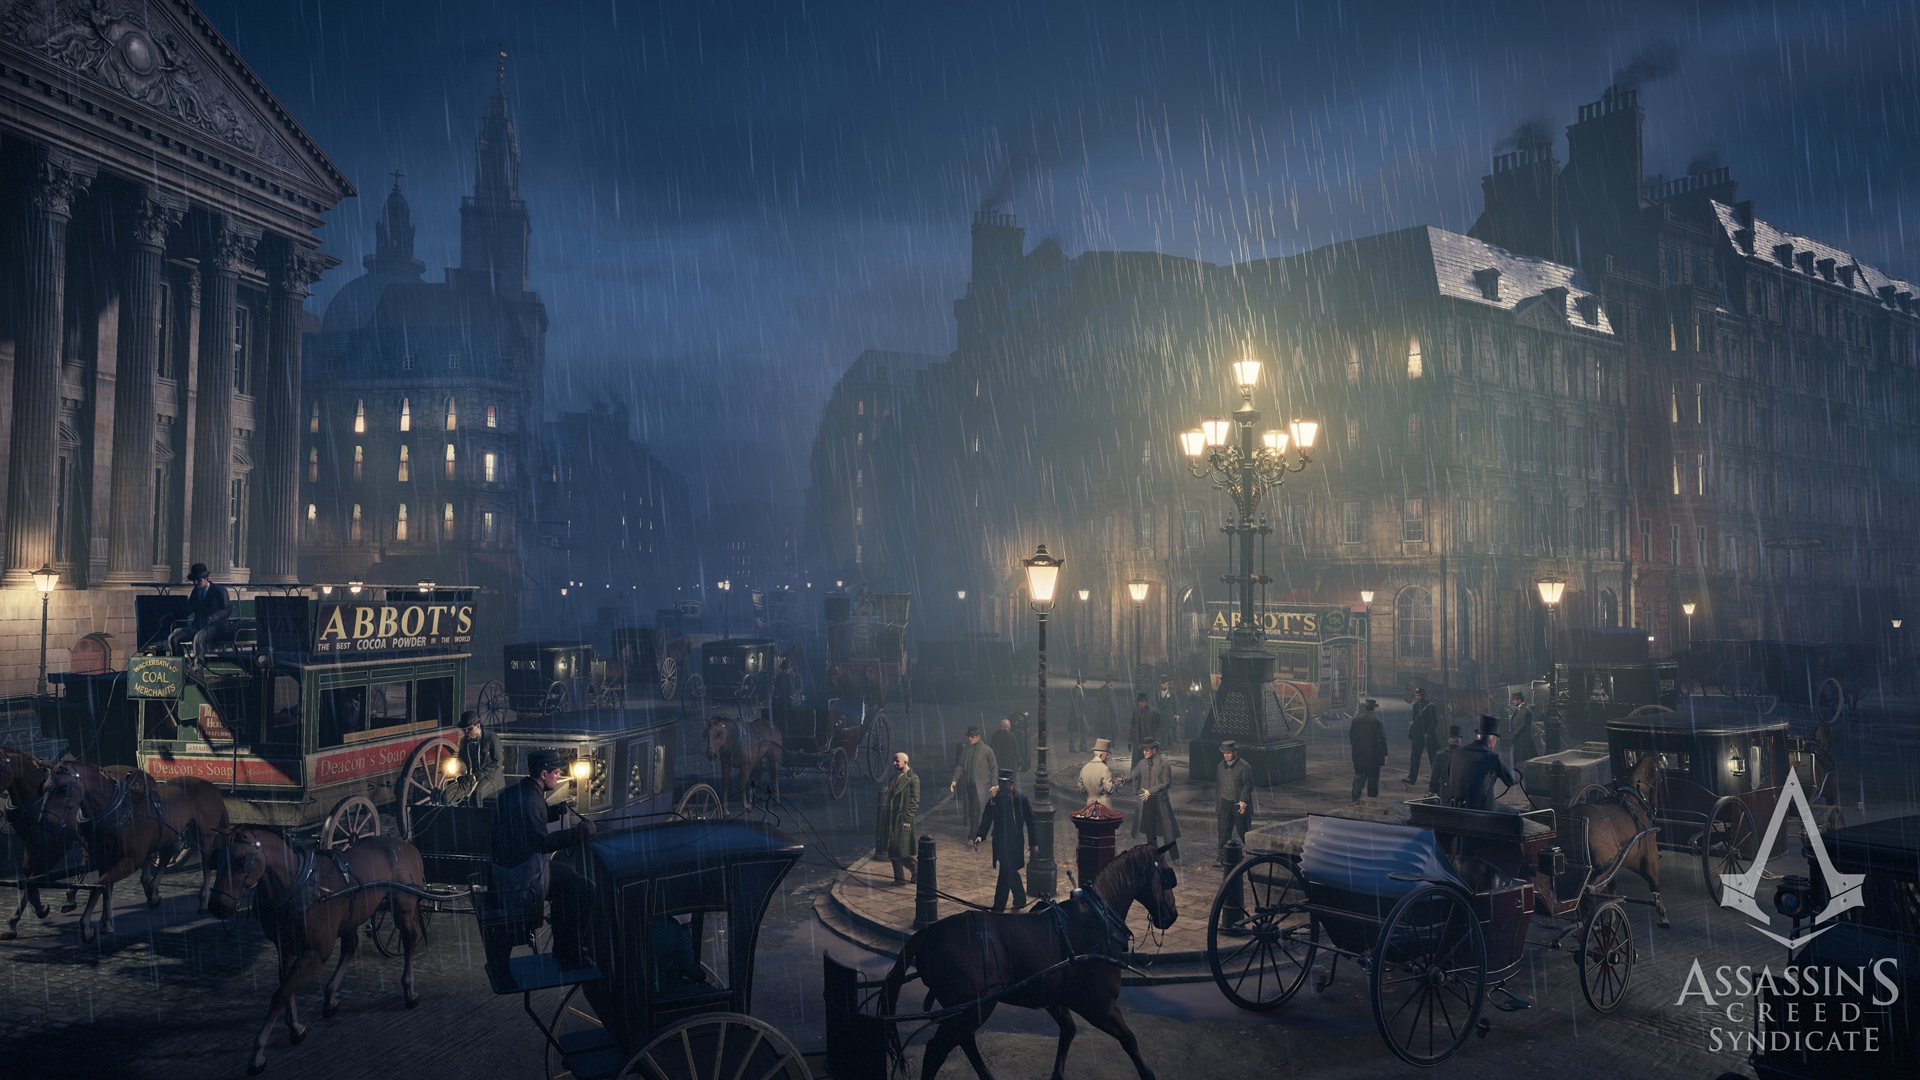 Assassin's Creed Syndicate launching Oct. set in Victorian London